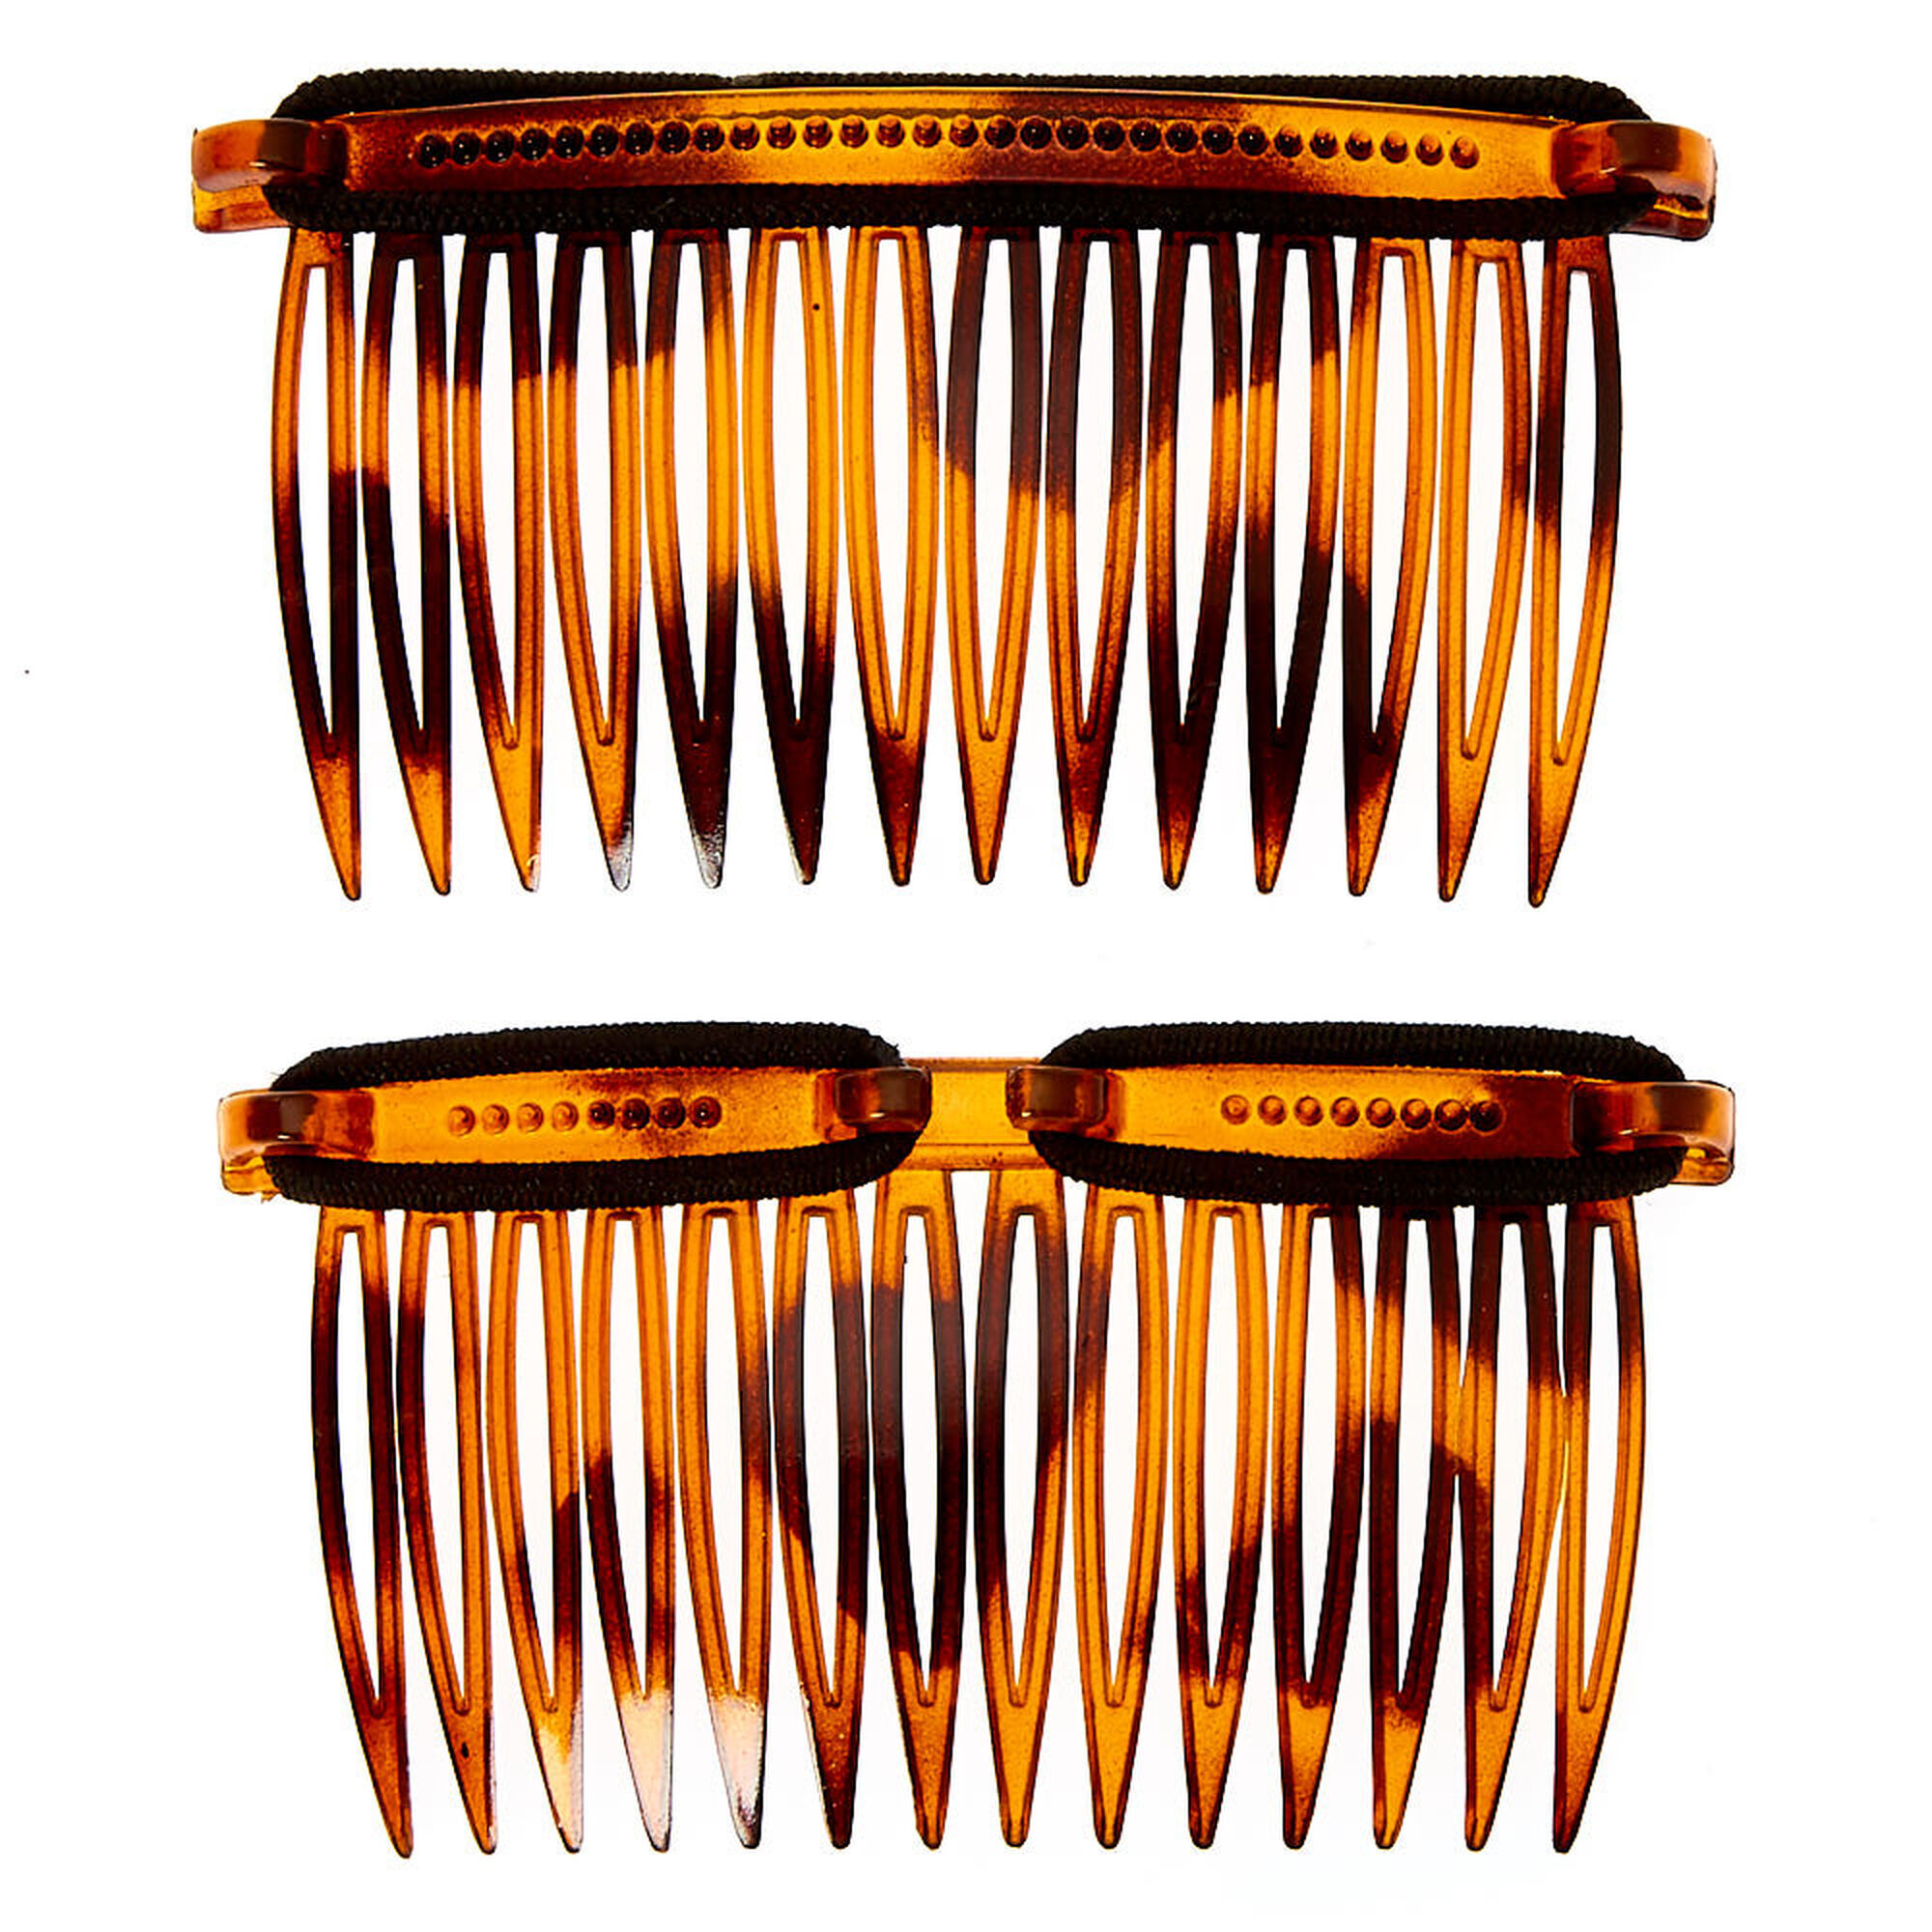 View Claires Localoc Bandables Tortoiseshell Hair Combs 2 Pack information